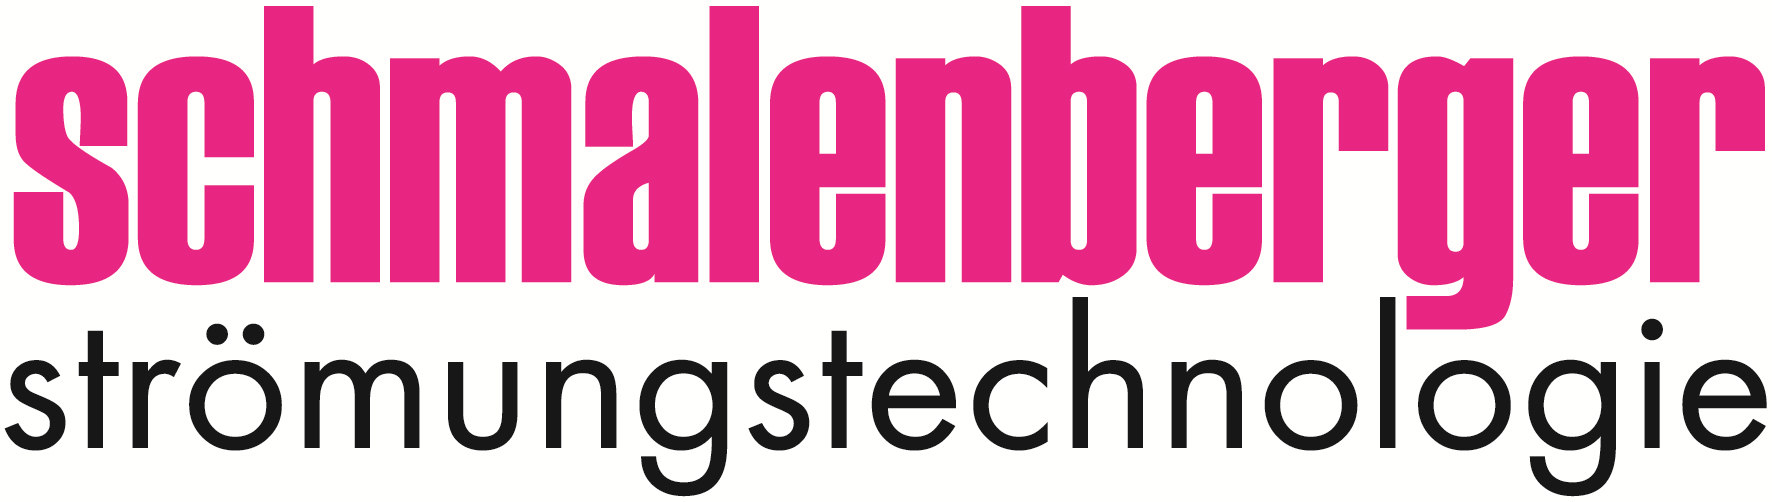 Stand 97 Schmalenberger GmbH & Co.